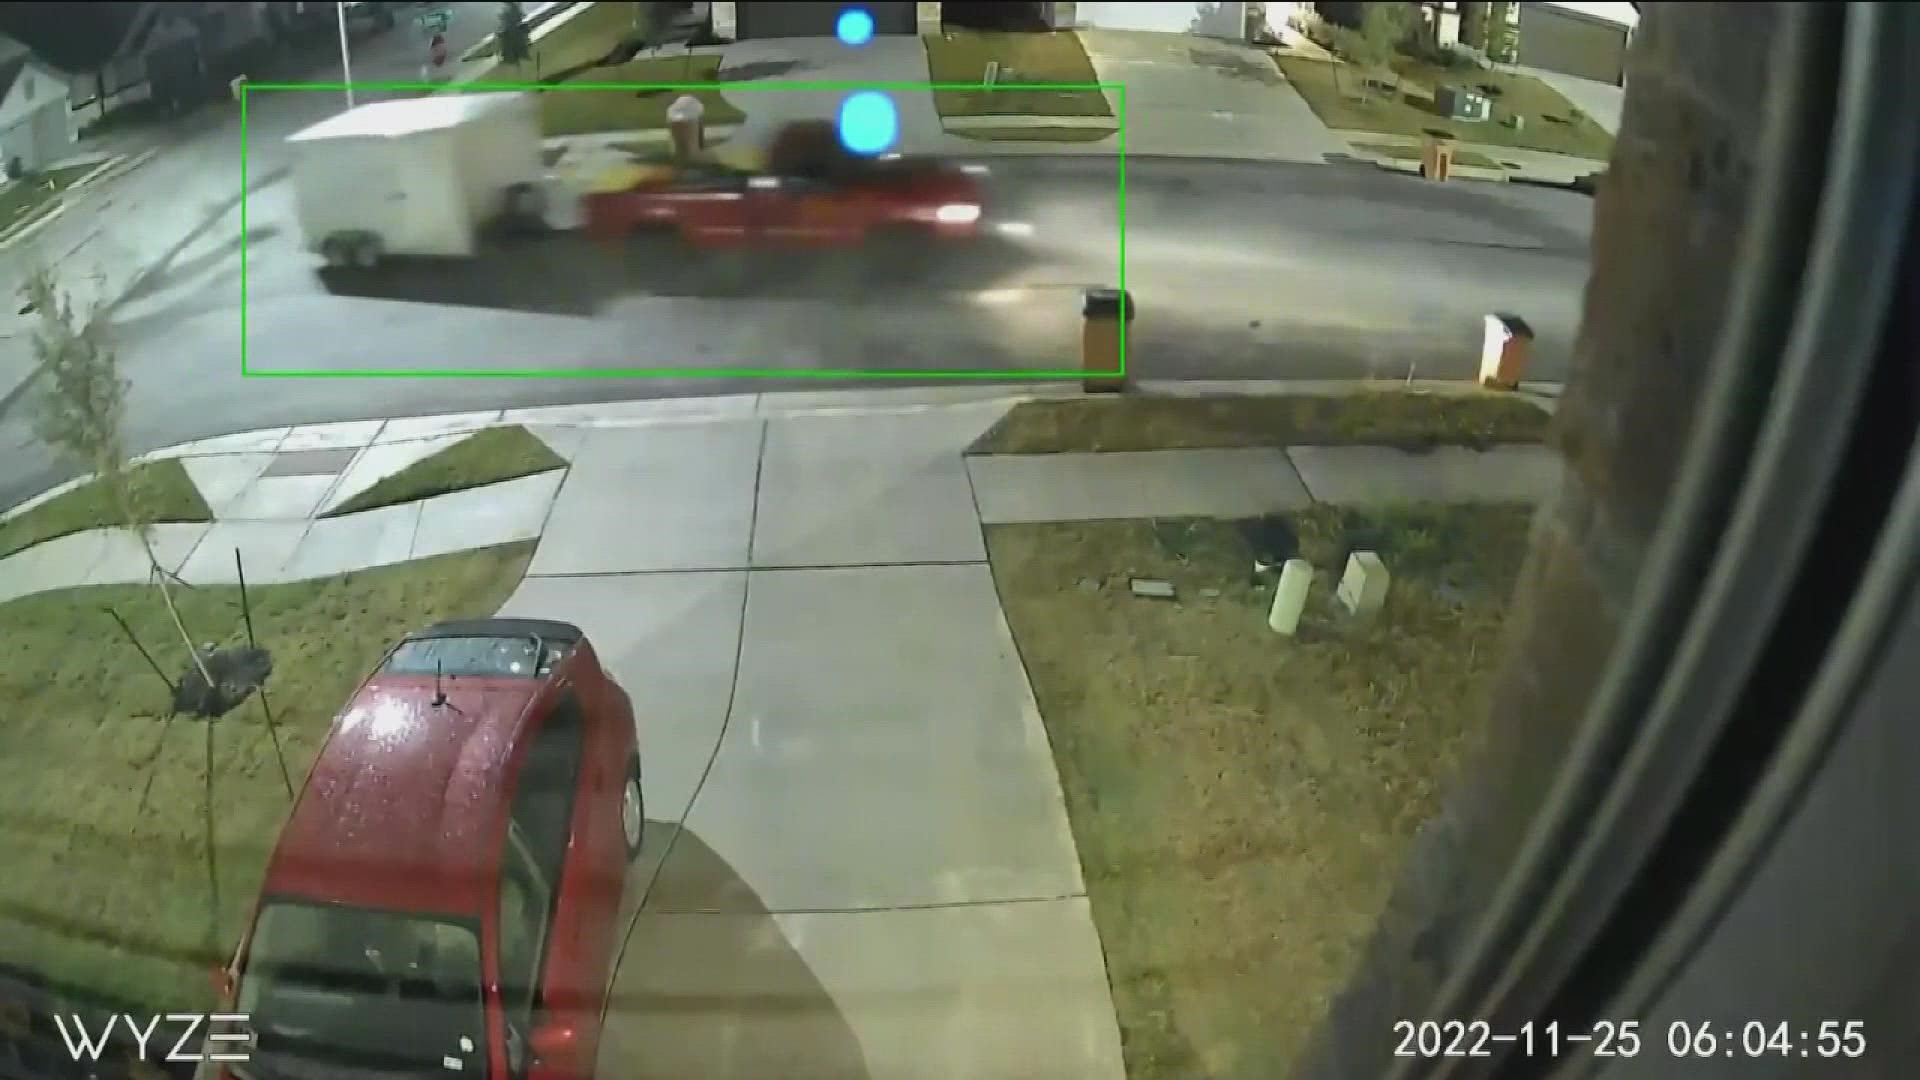 Surveillance video shows a red truck driving up, stopping directly next to the trailer, unhitching it from the band's van and driving away with the equipment.